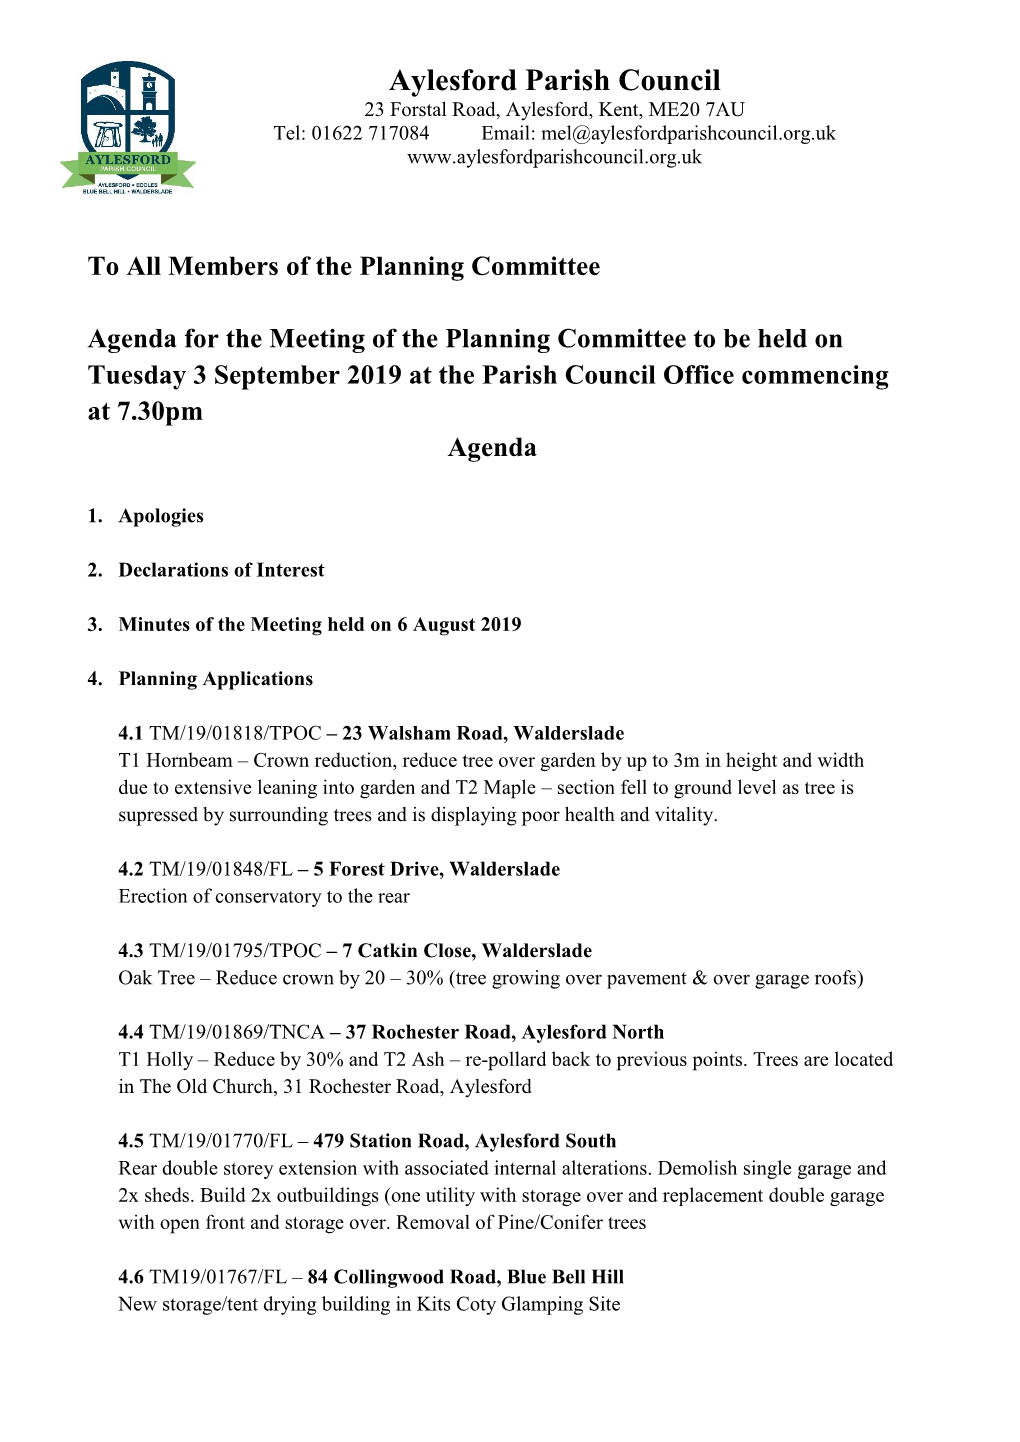 3 September 2019 at the Parish Council Office Commencing at 7.30Pm Agenda